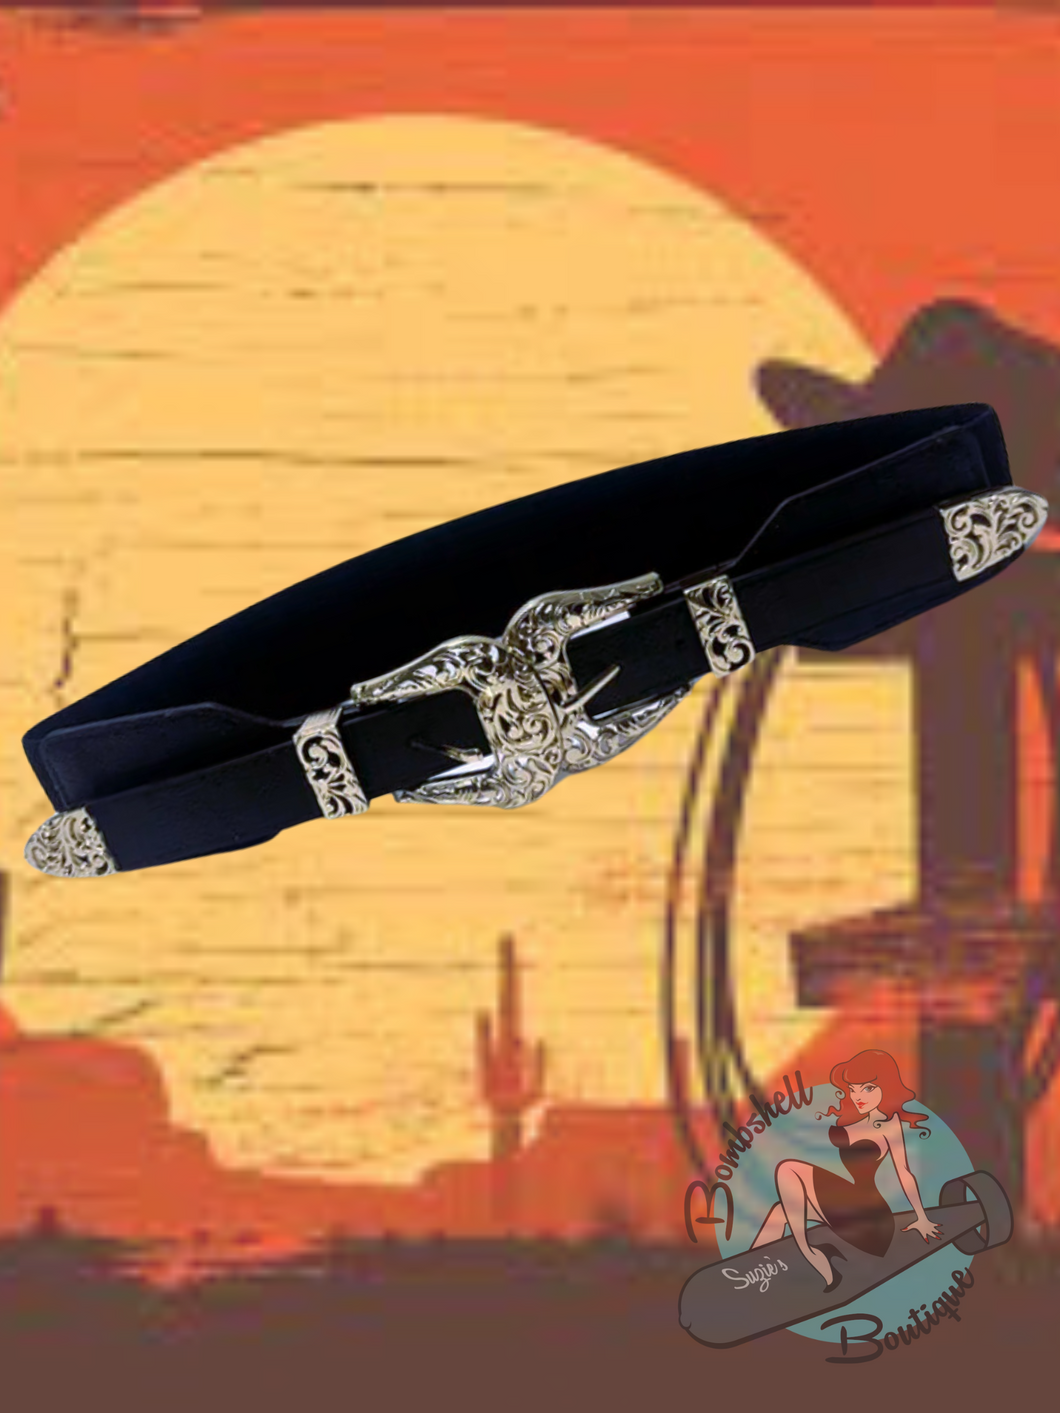 Elasticated double buckle western style ladies belt. Perfect for completing a vintage western pinup look.